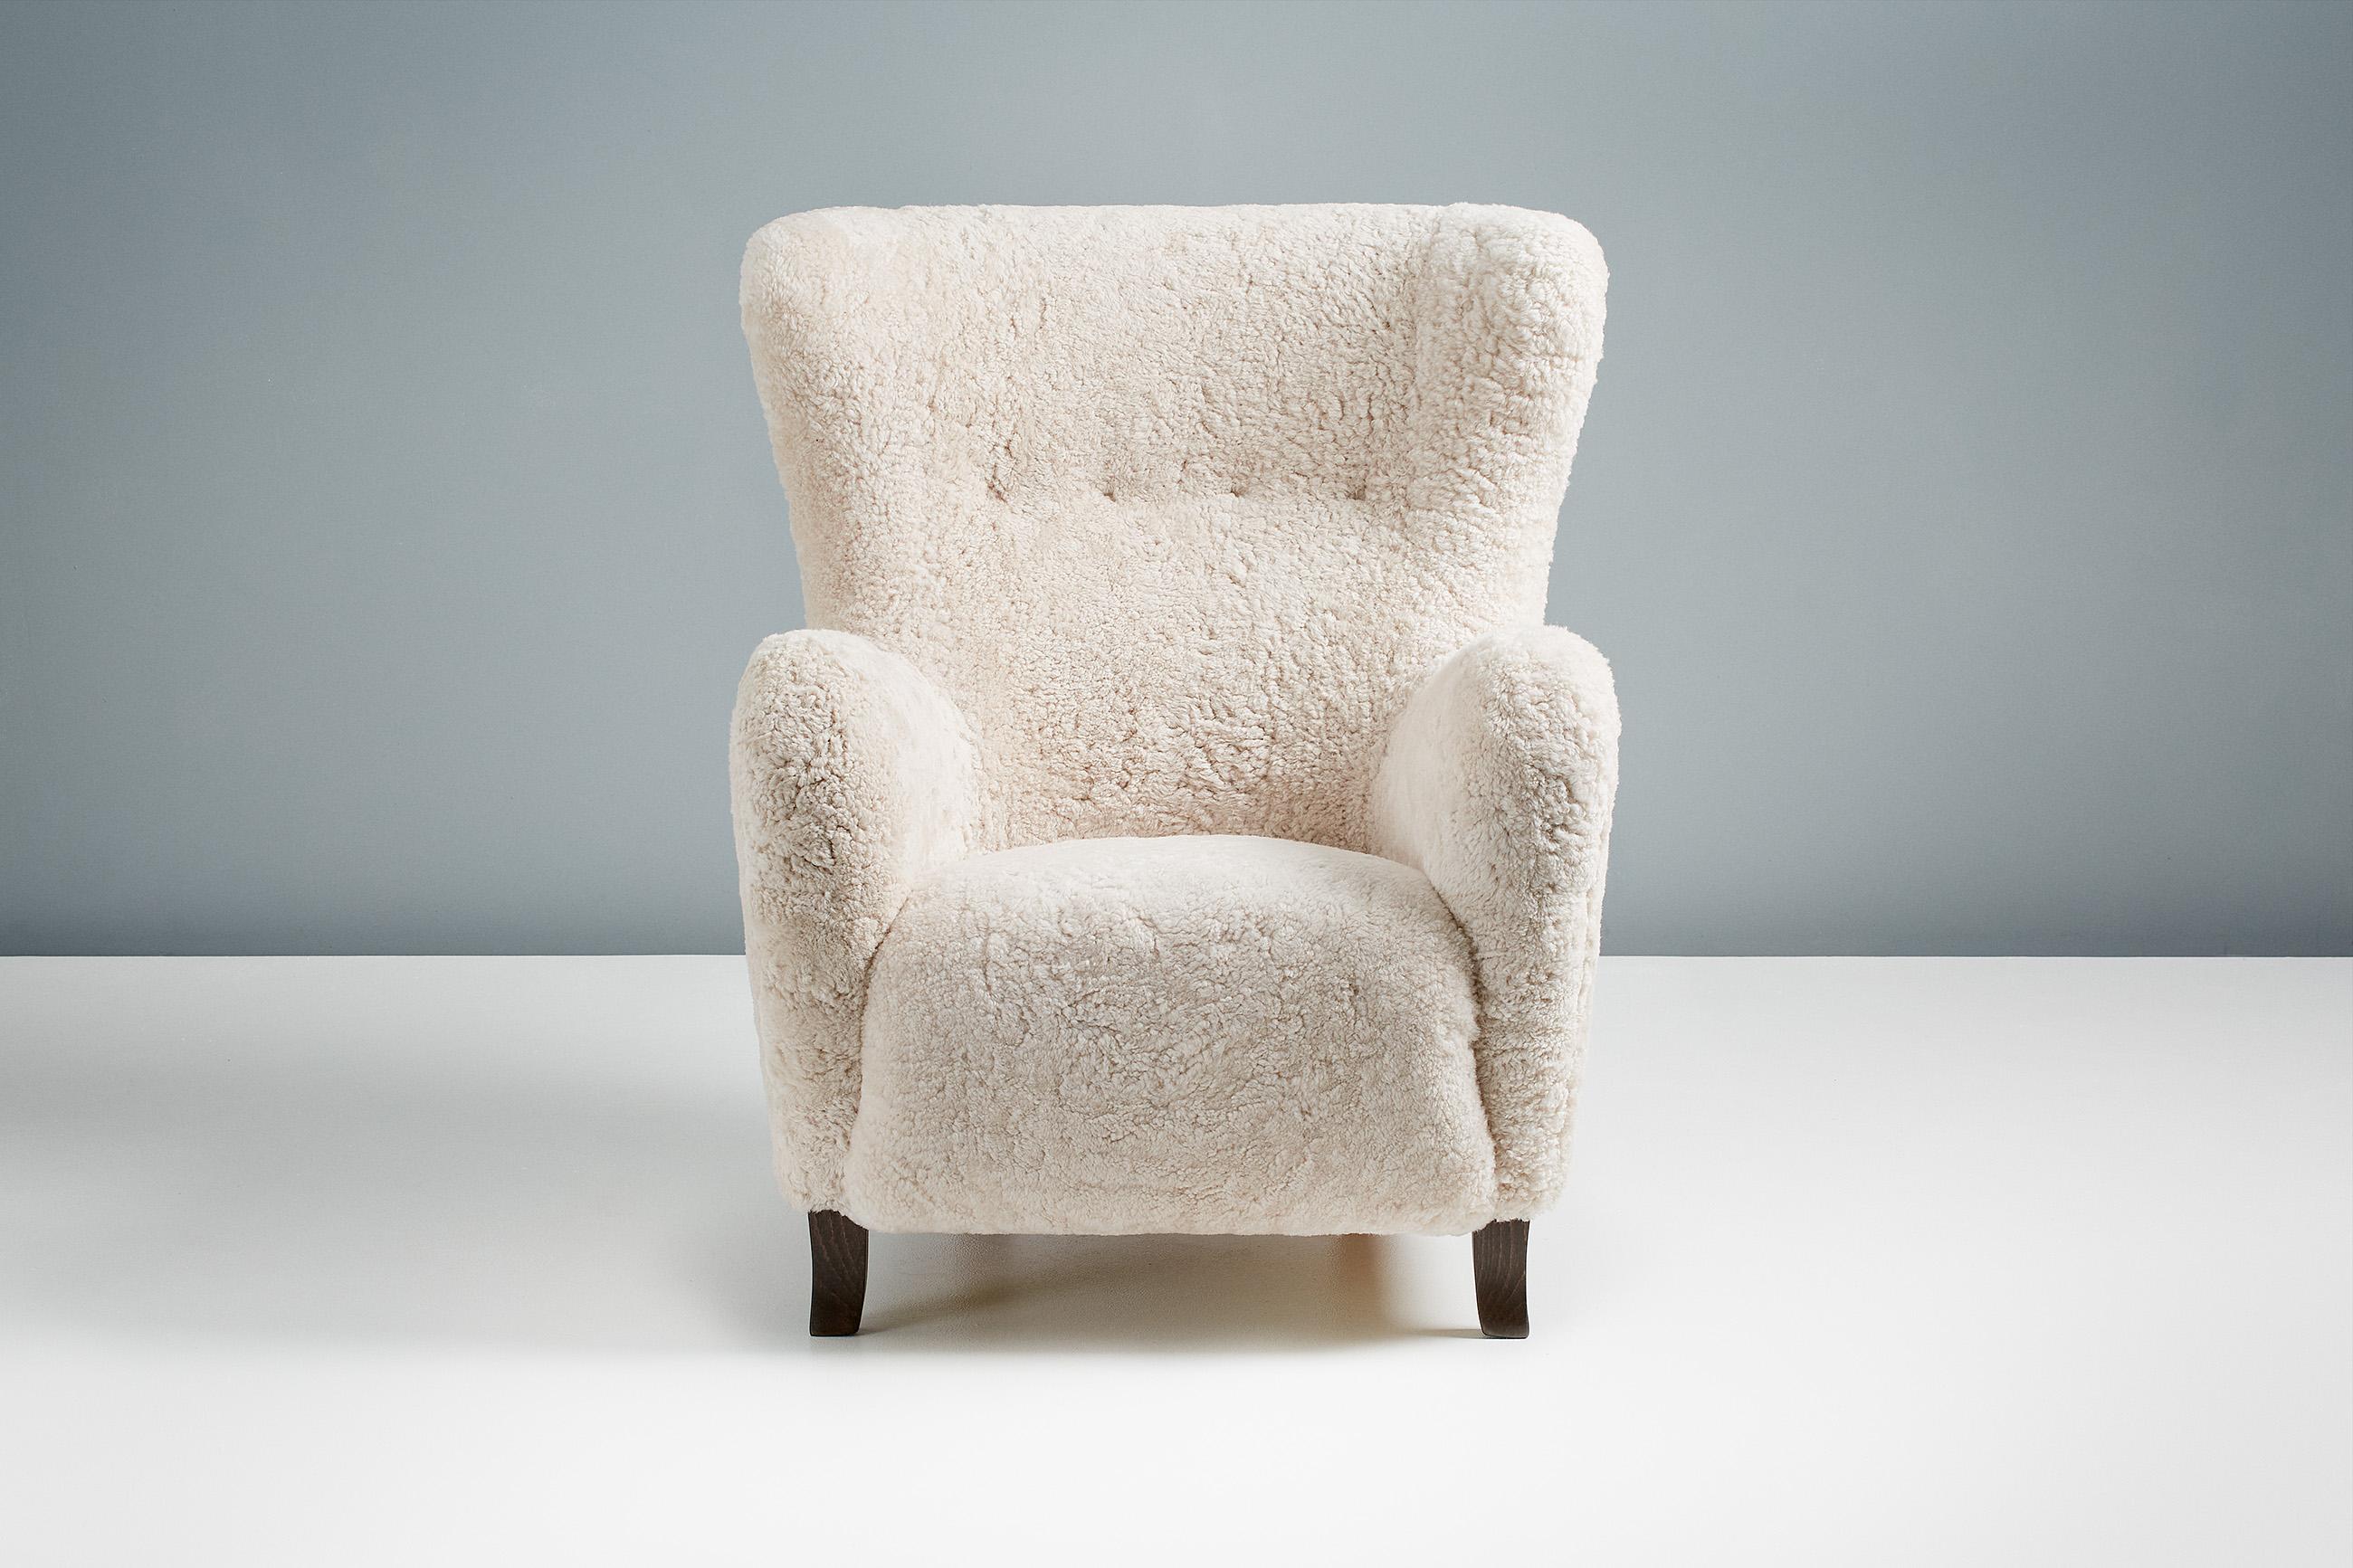 Dagmar Design

Sampo Wing Chair

A custom-made pair of wing chairs developed & produced at our workshops in London using the highest quality materials. The frame is built from solid tulipwood with a fully sprung seat. The Sampo chair is available to